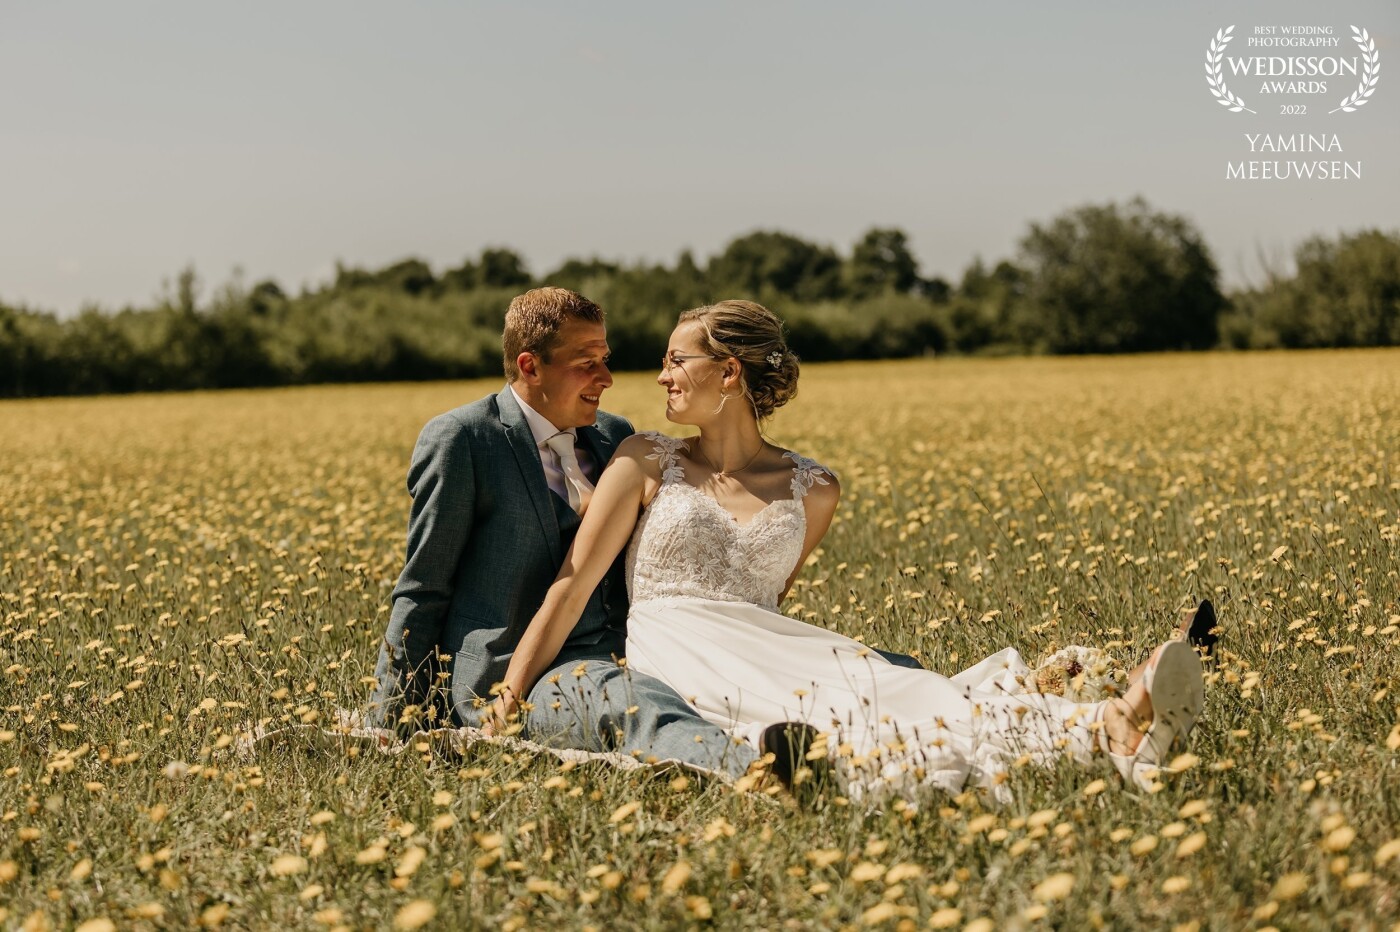 This bridal couple had the entire wedding on their own land, it was amazing. And when we saw that a piece of land was full of beautiful yellow flowers, we took some pictures here. This photo is one of them